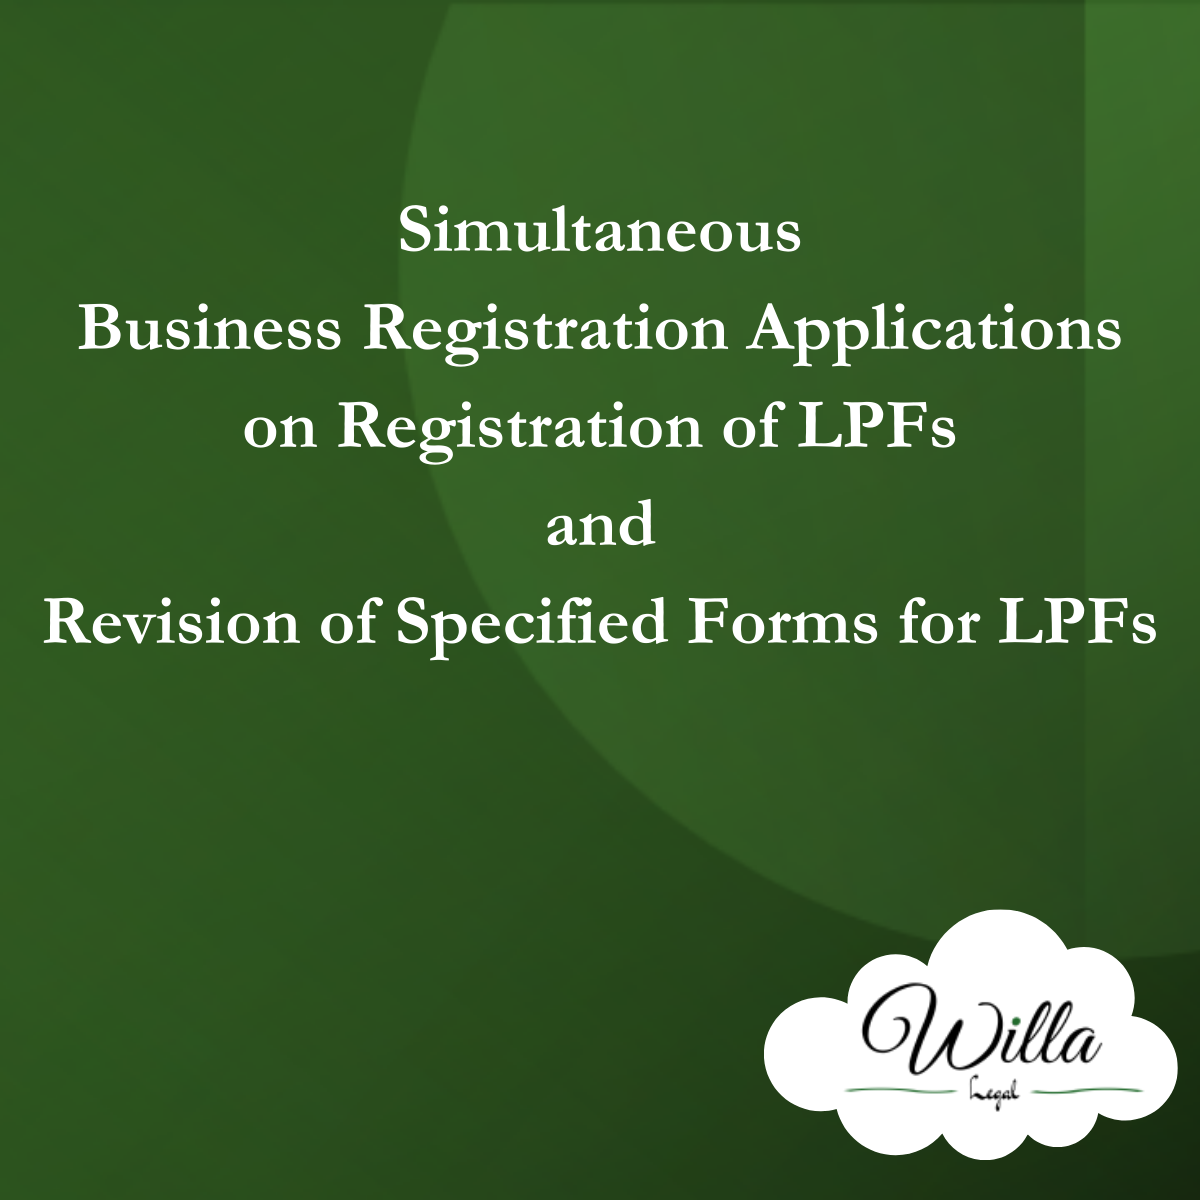 Simultaneous Business Registration Applications on Registration of LPFs and Revision of Specified Forms for LPFs